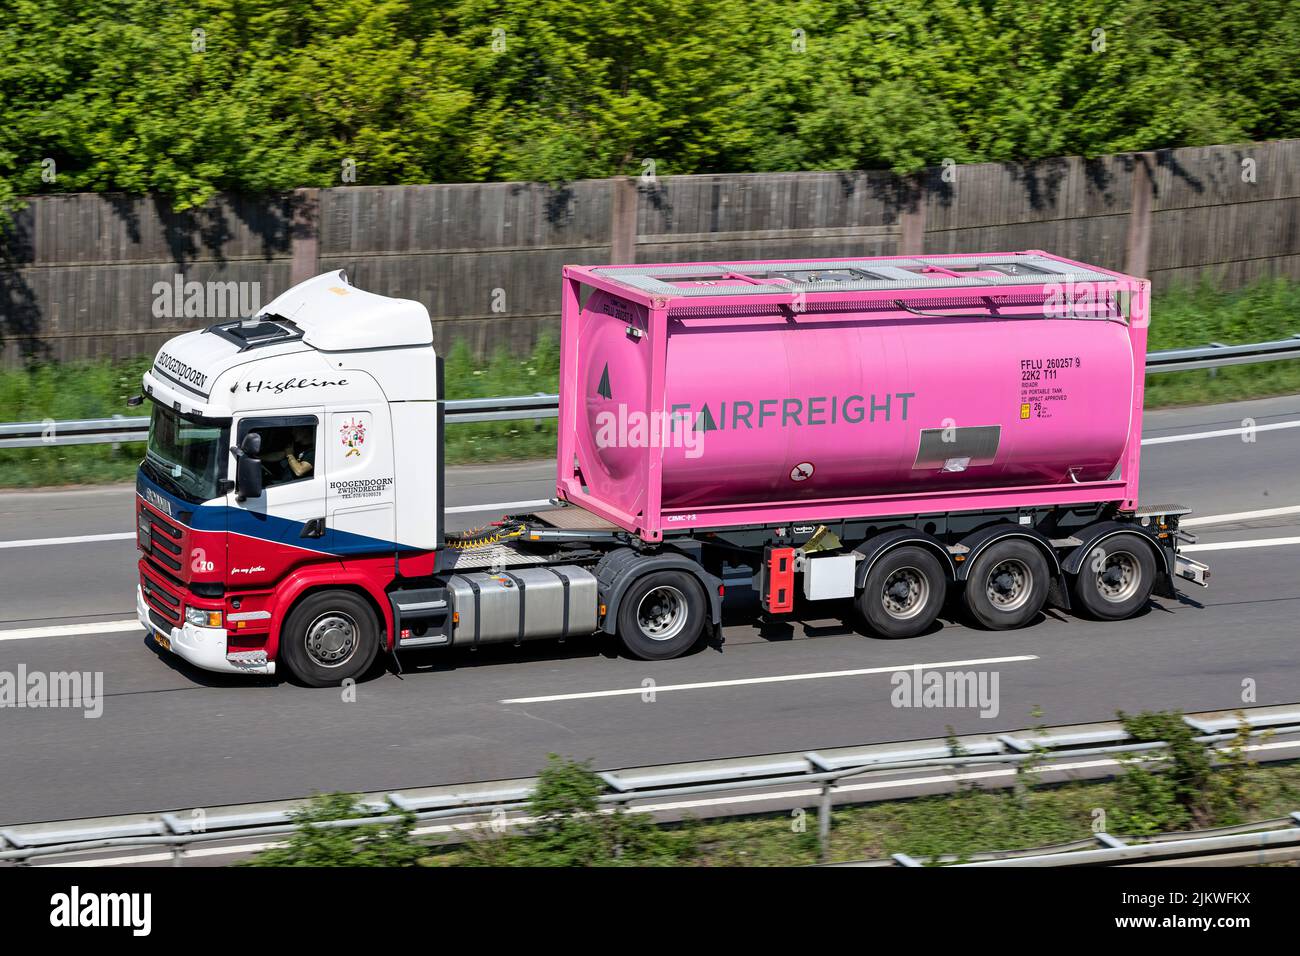 Hoogendoorn Scania truck with Fairfreight tank container on motorway Stock Photo